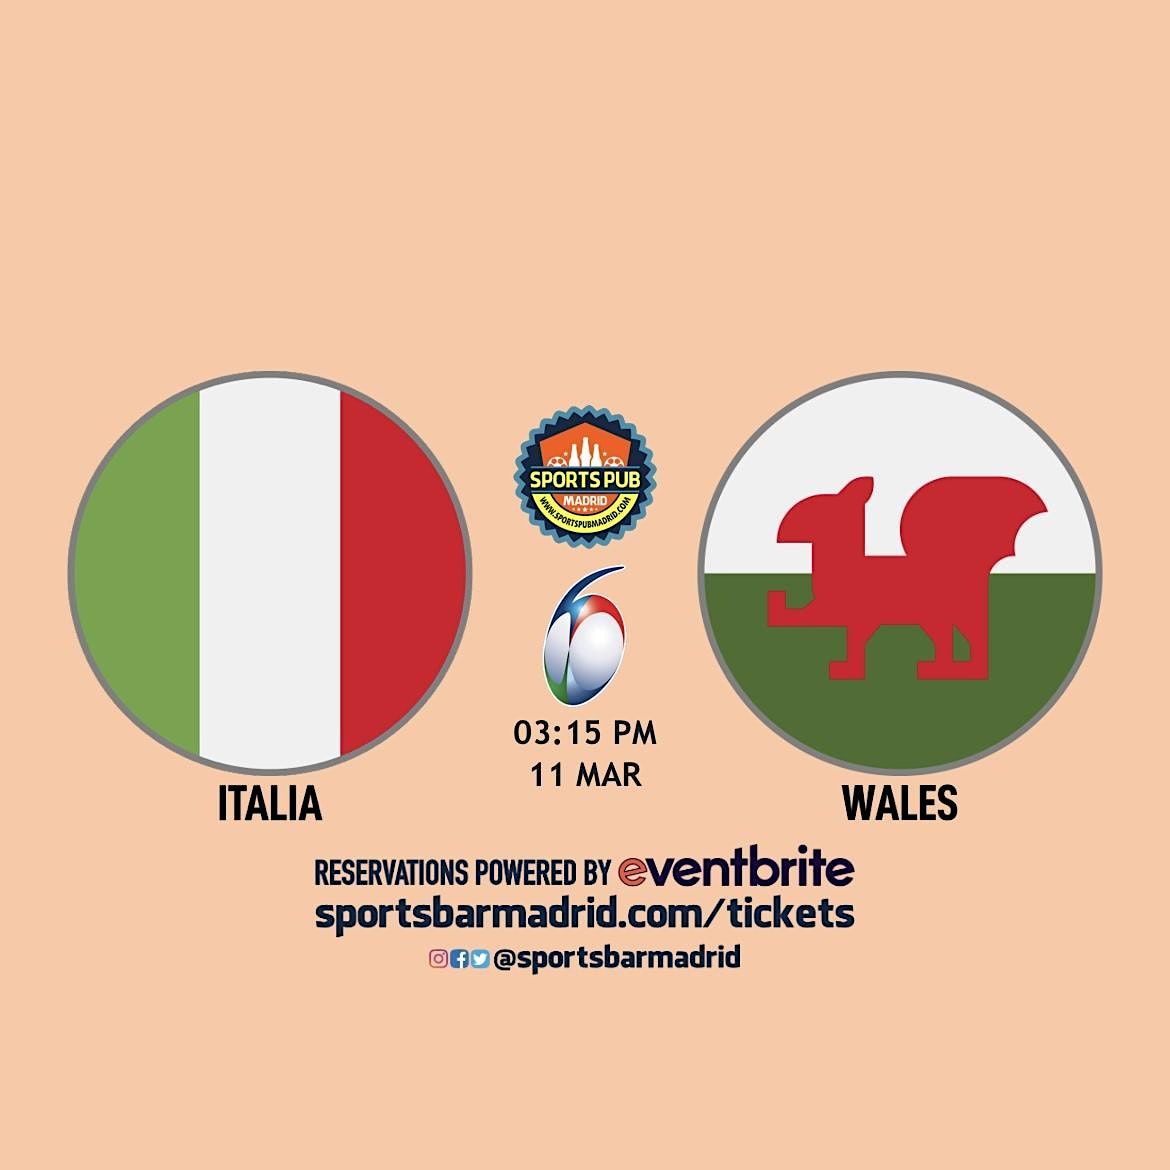 Italy v Wales | Rugby Six Nations - Sports Pub San Mateo